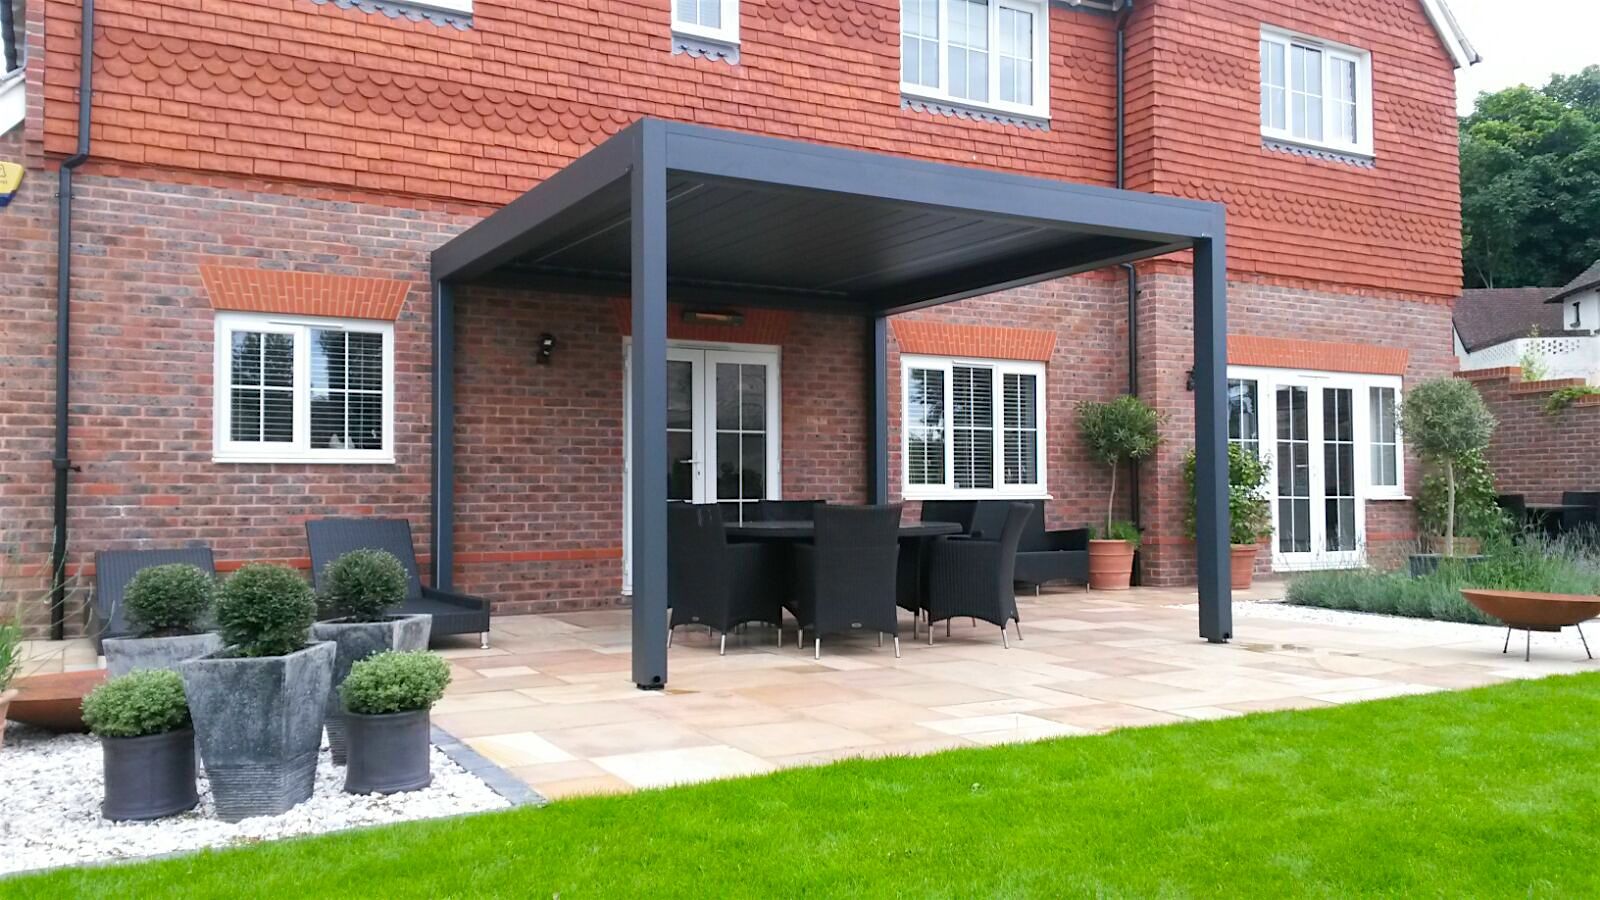 Outdoor Living Pod, Louvered Roof Patio Canopy Installation in Findon, West Sussex. homify Vườn phong cách hiện đại outdoor living pod,louvered,roof,patio,terrace,canopy,garden,room